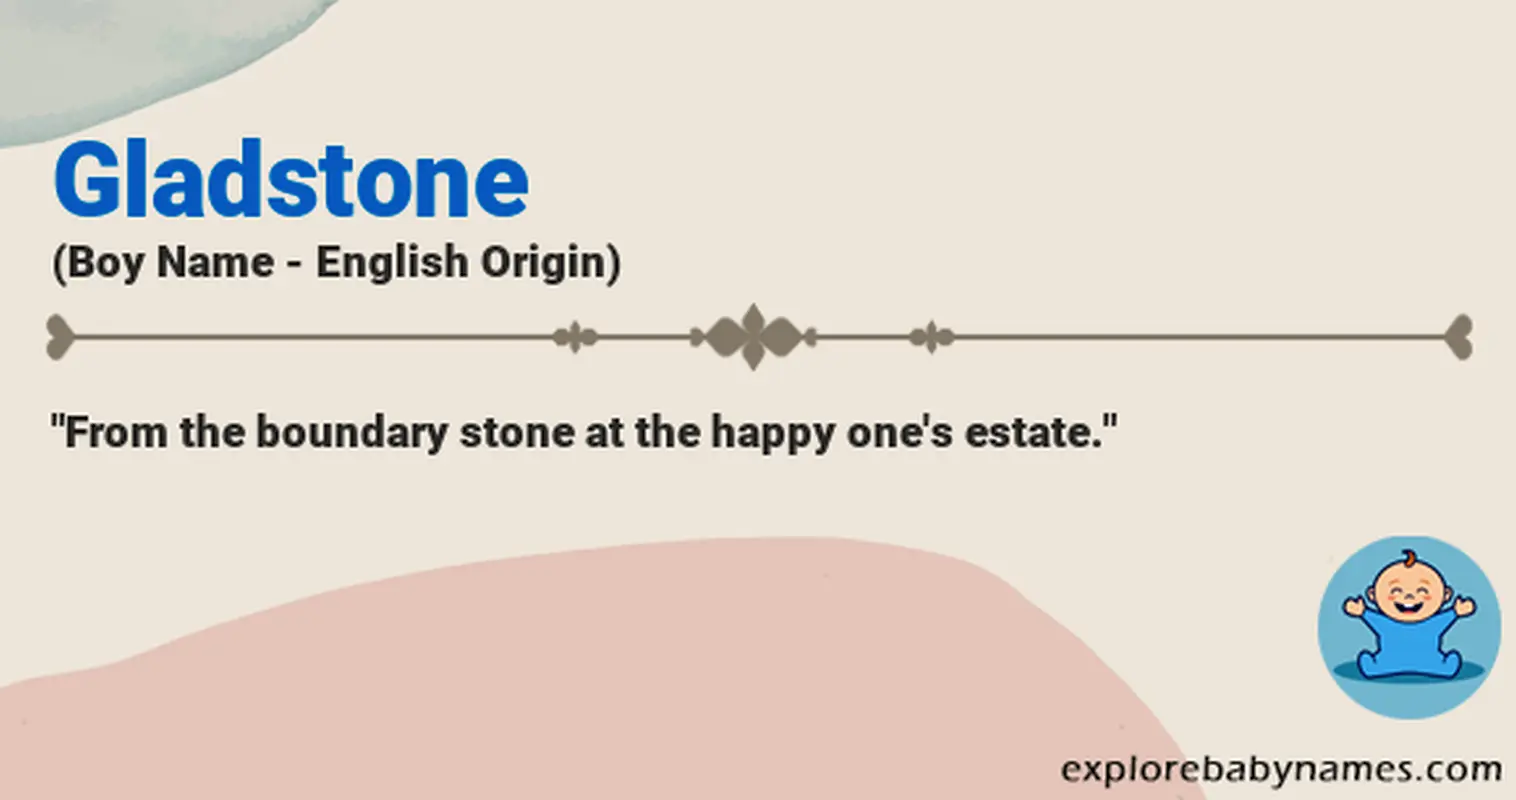 Meaning of Gladstone